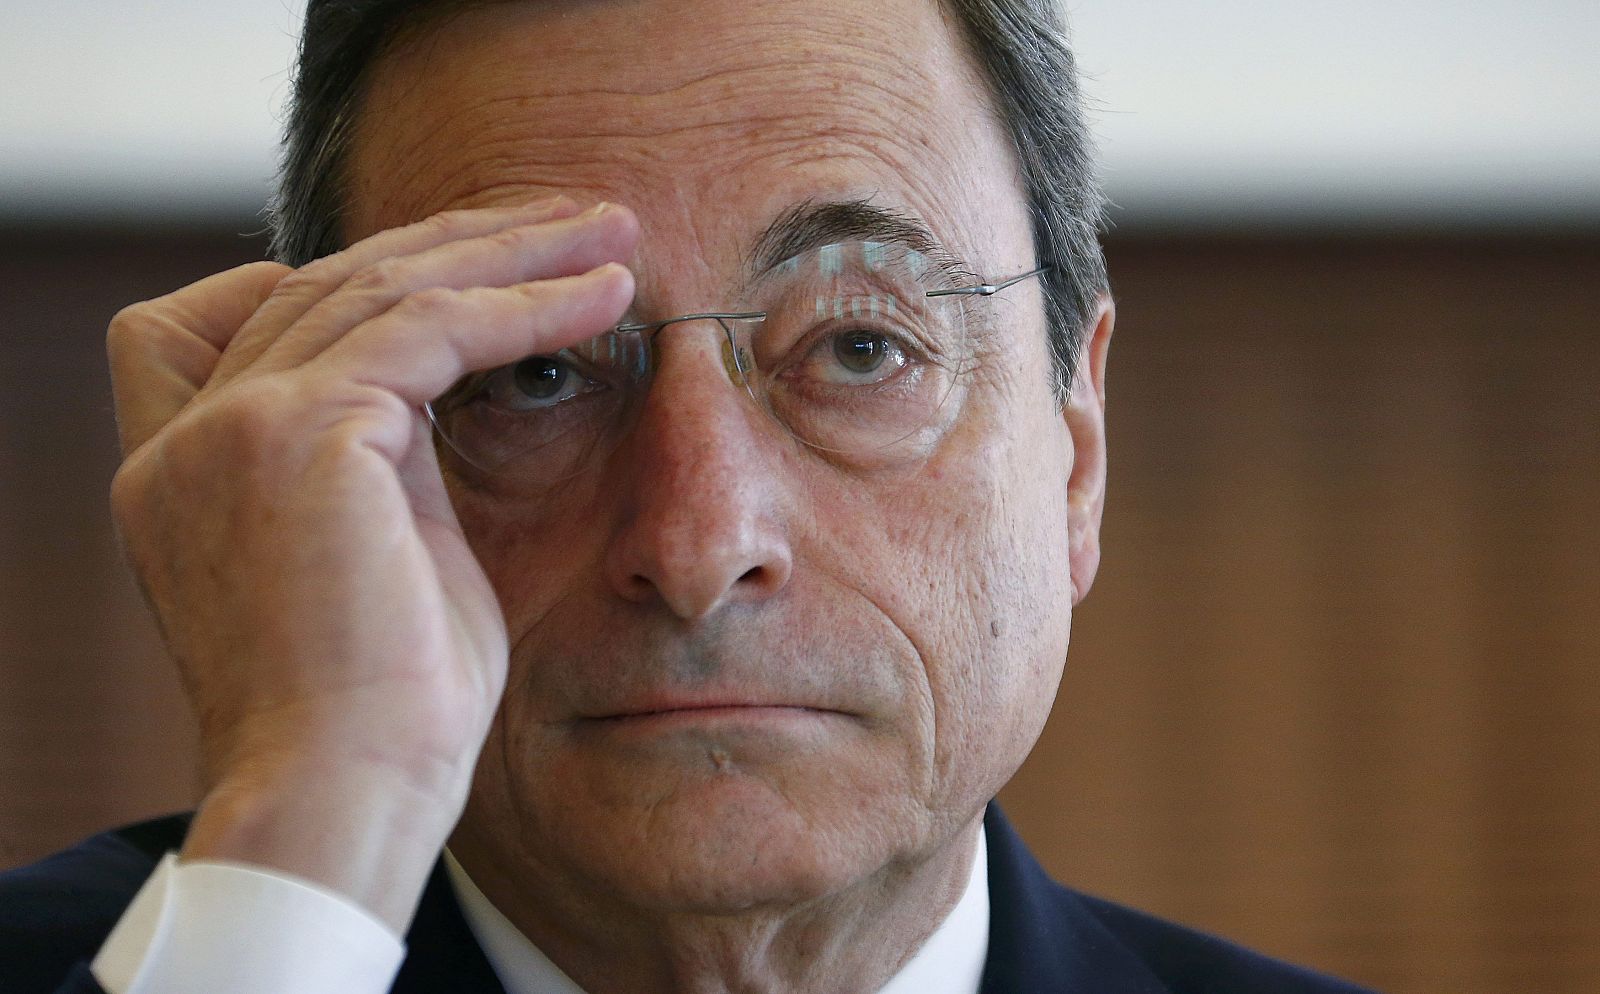 European Central Bank (ECB) President Draghi adjusts his glasses during the IMFS Conference 2015 in Frankfurt